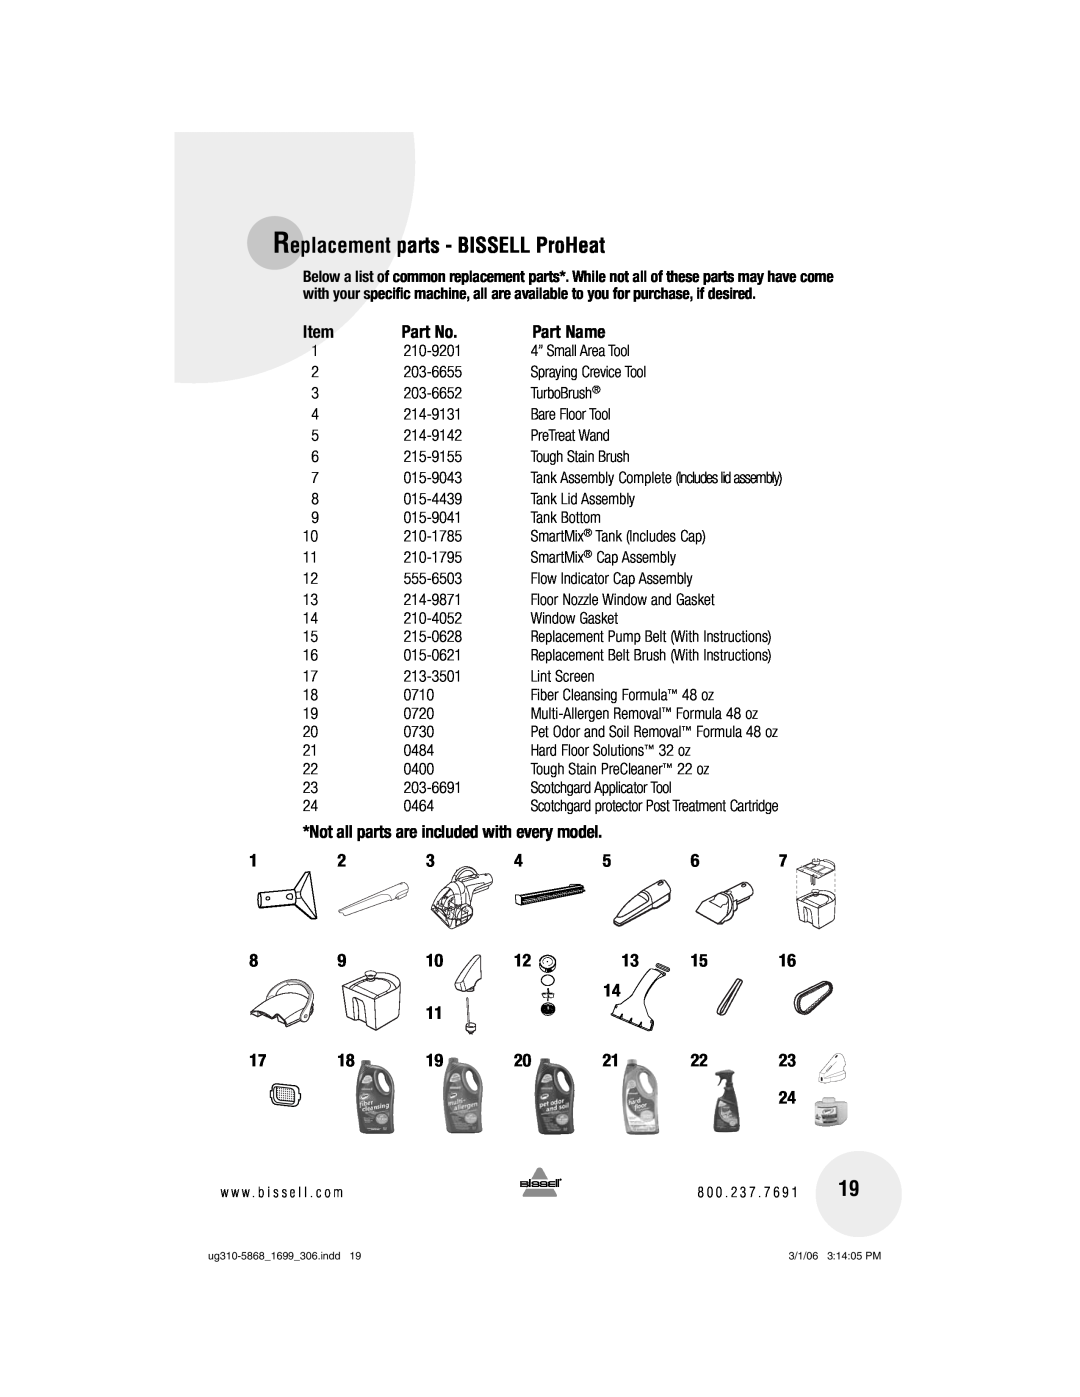 Bissell 1699, 8910 warranty Replacement parts - BISSELL ProHeat, Part Name, Not all parts are included with every model 